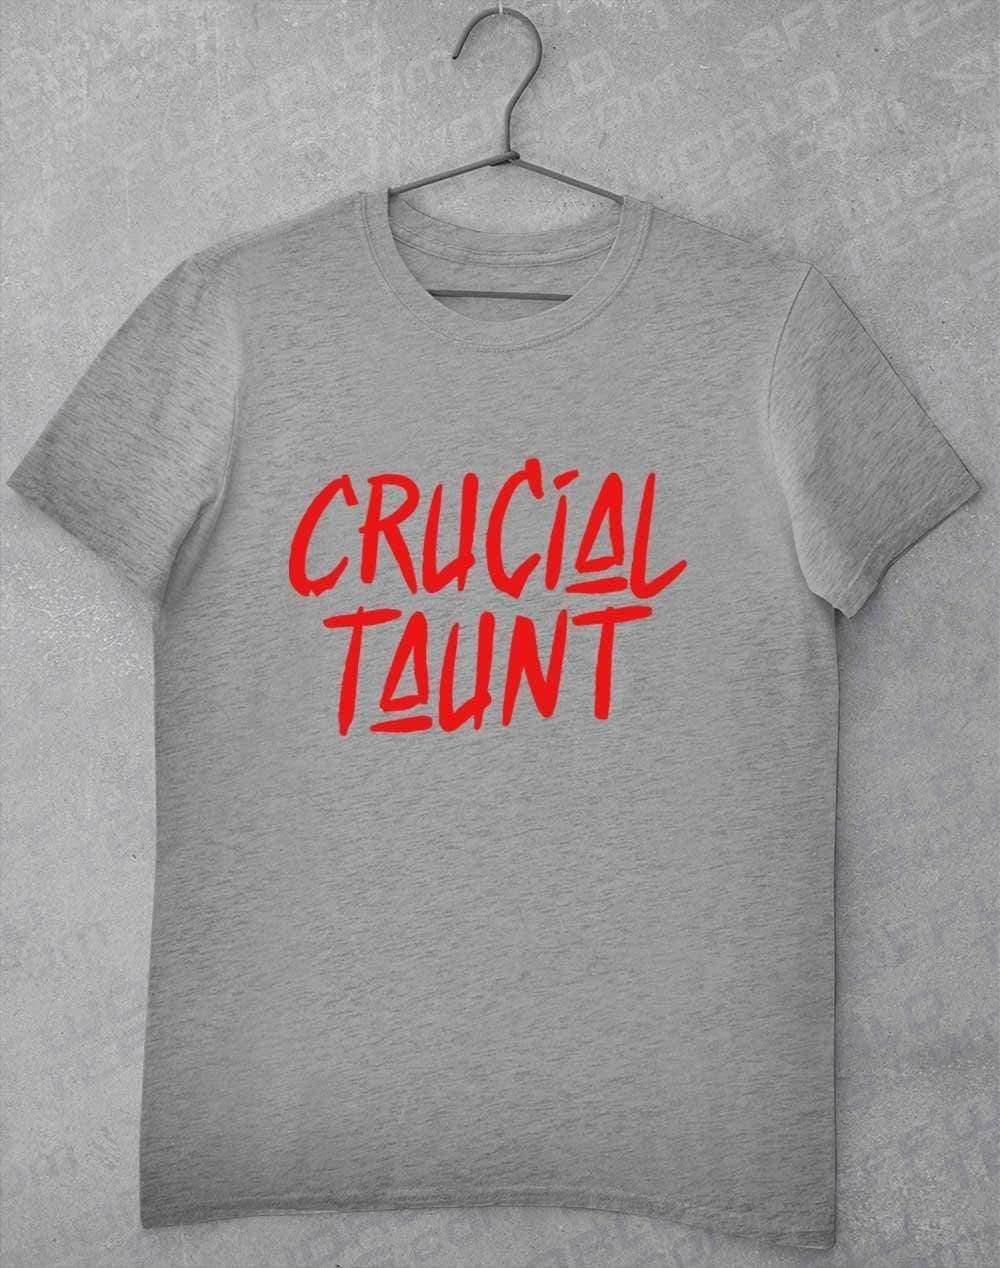 Crucial Taunt T-Shirt S / Heather Grey  - Off World Tees